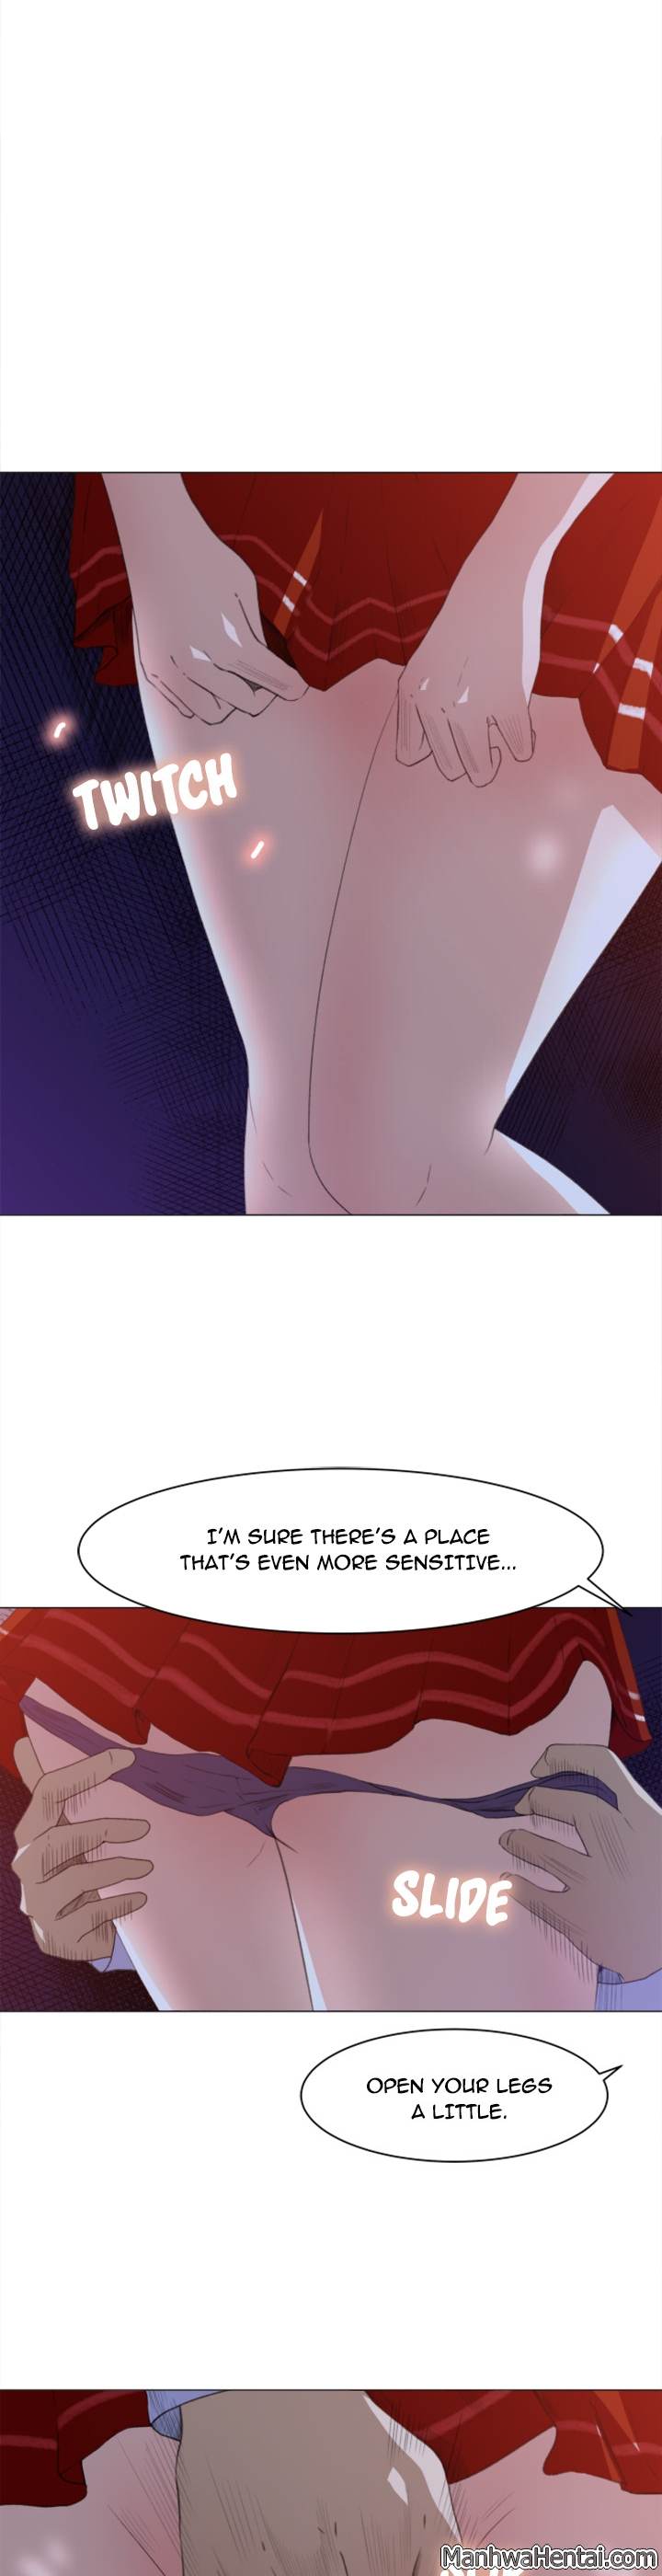 Inside the Uniform - Chapter 1 Page 10